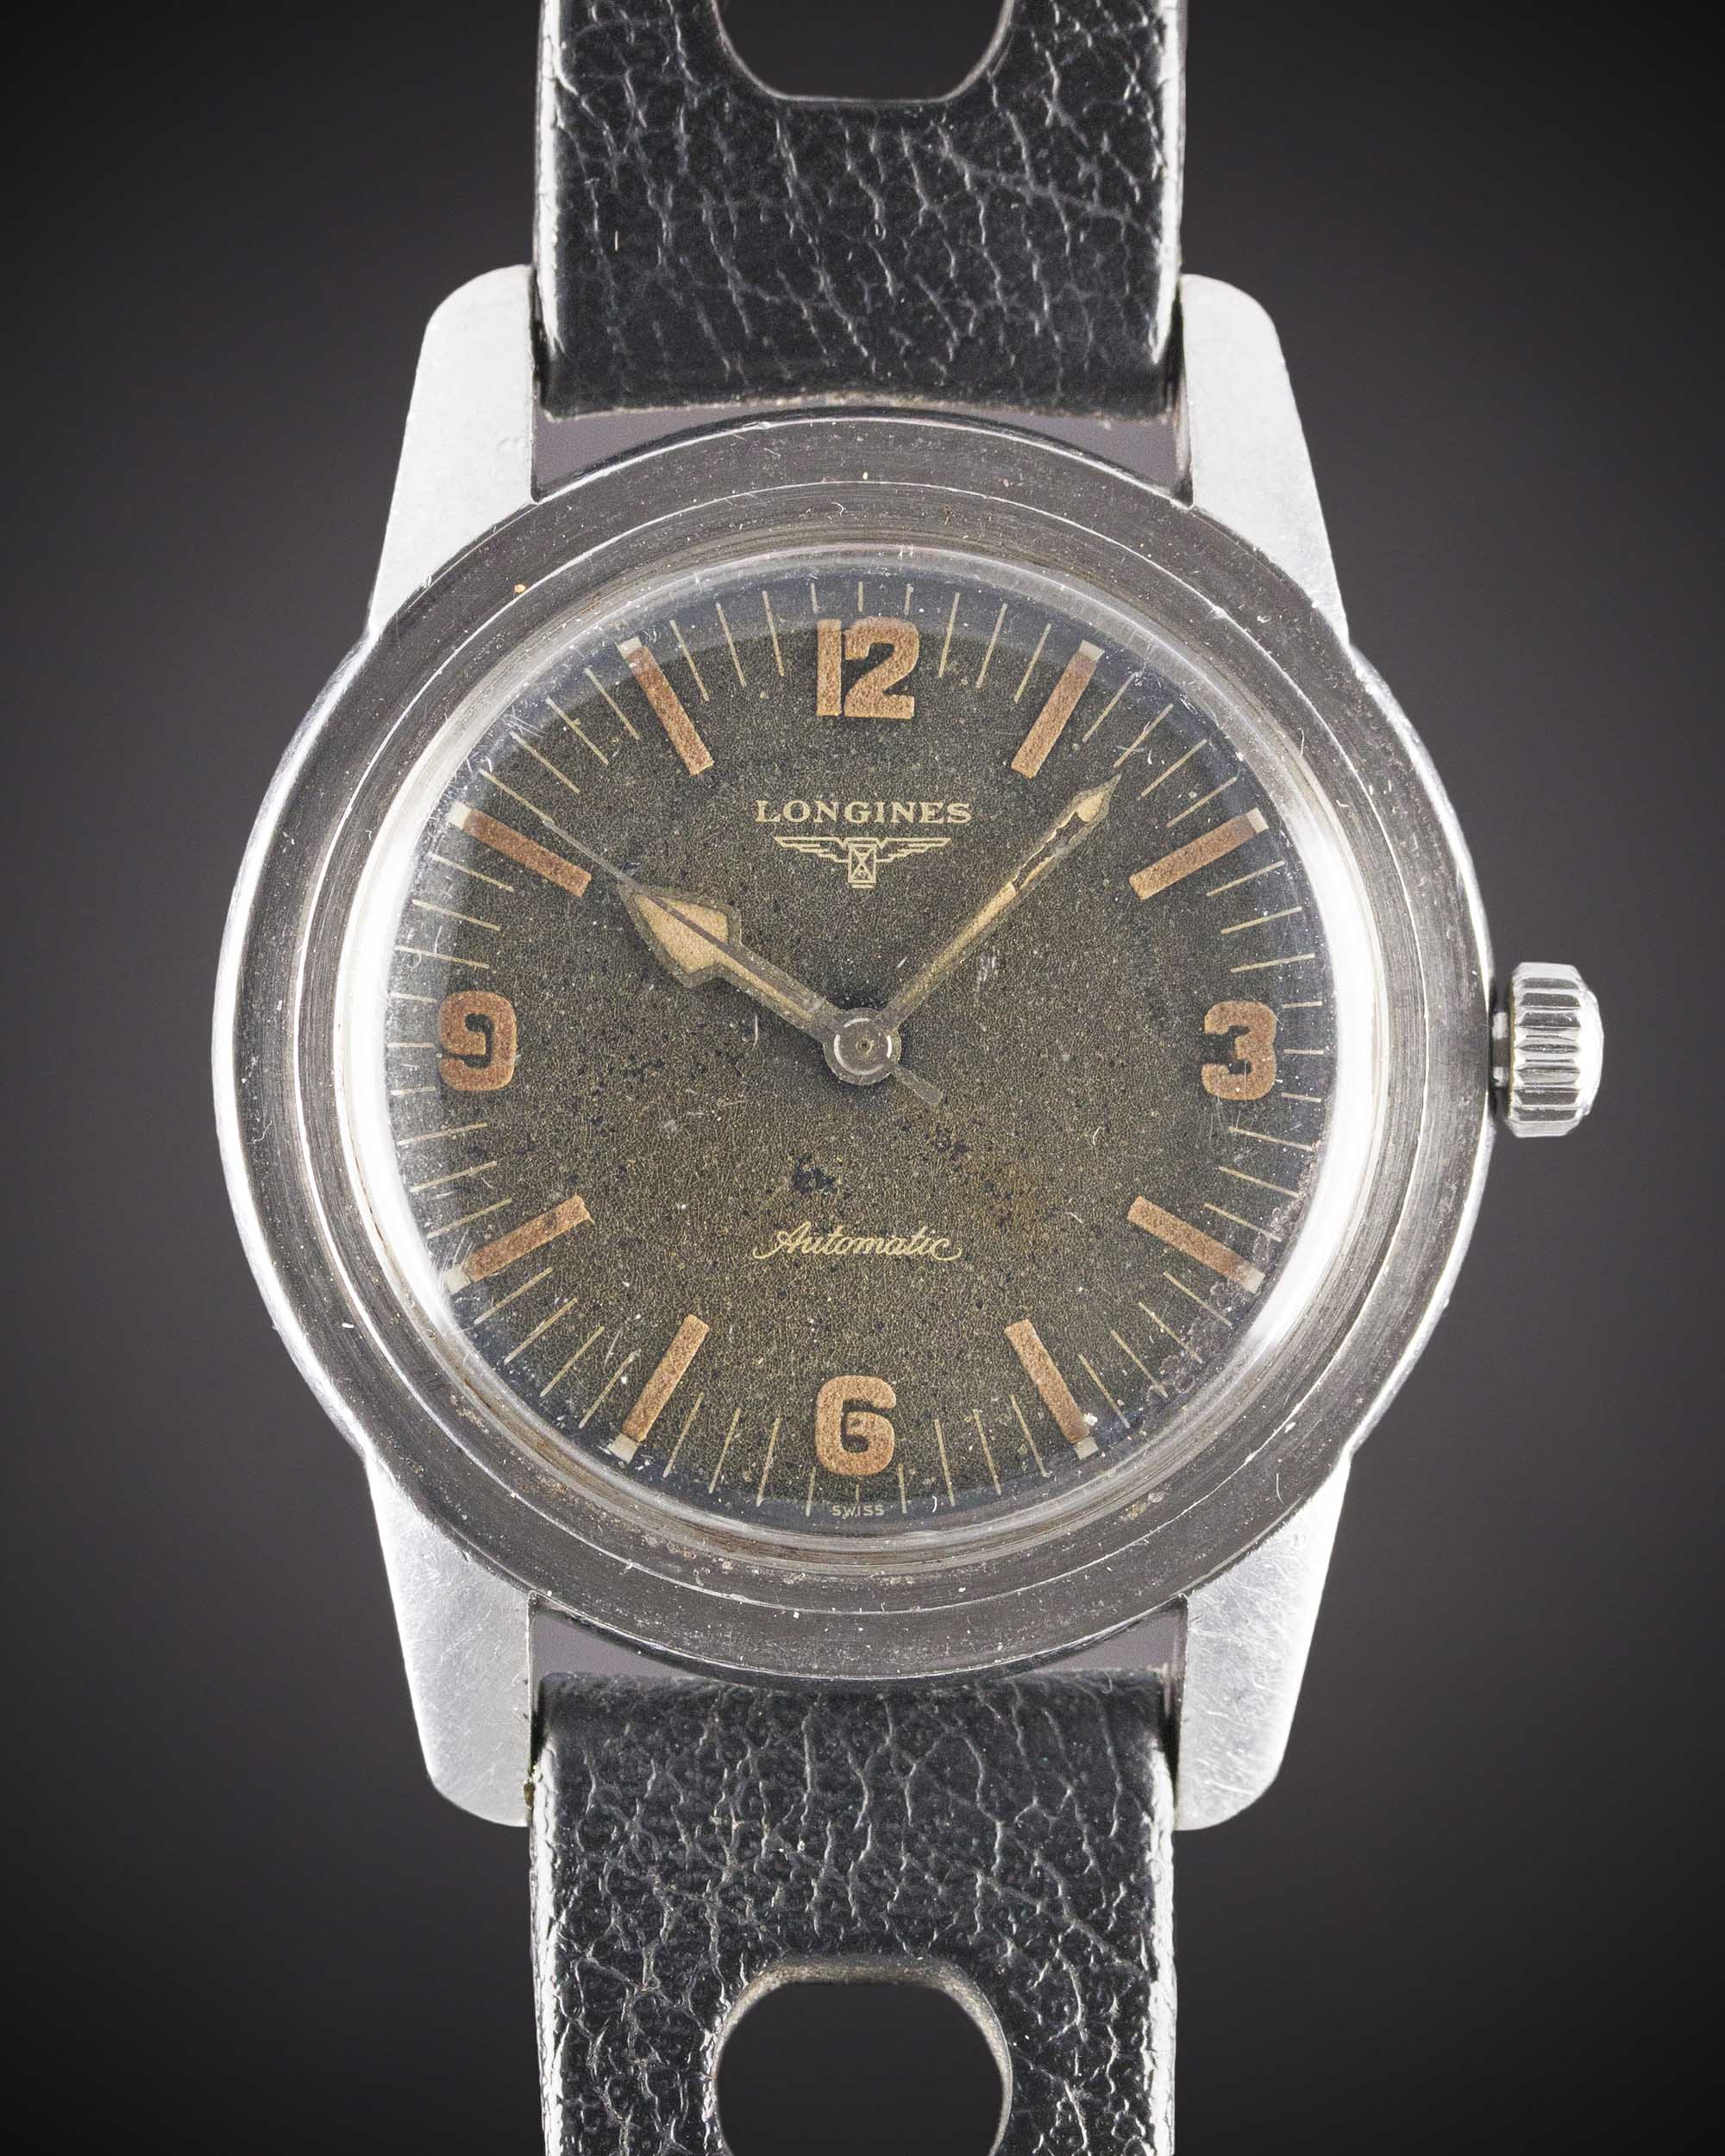 A VERY RARE GENTLEMAN'S STAINLESS STEEL LONGINES "NAUTILUS" SKIN DIVER AUTOMATIC DIVERS WRIST - Image 2 of 10